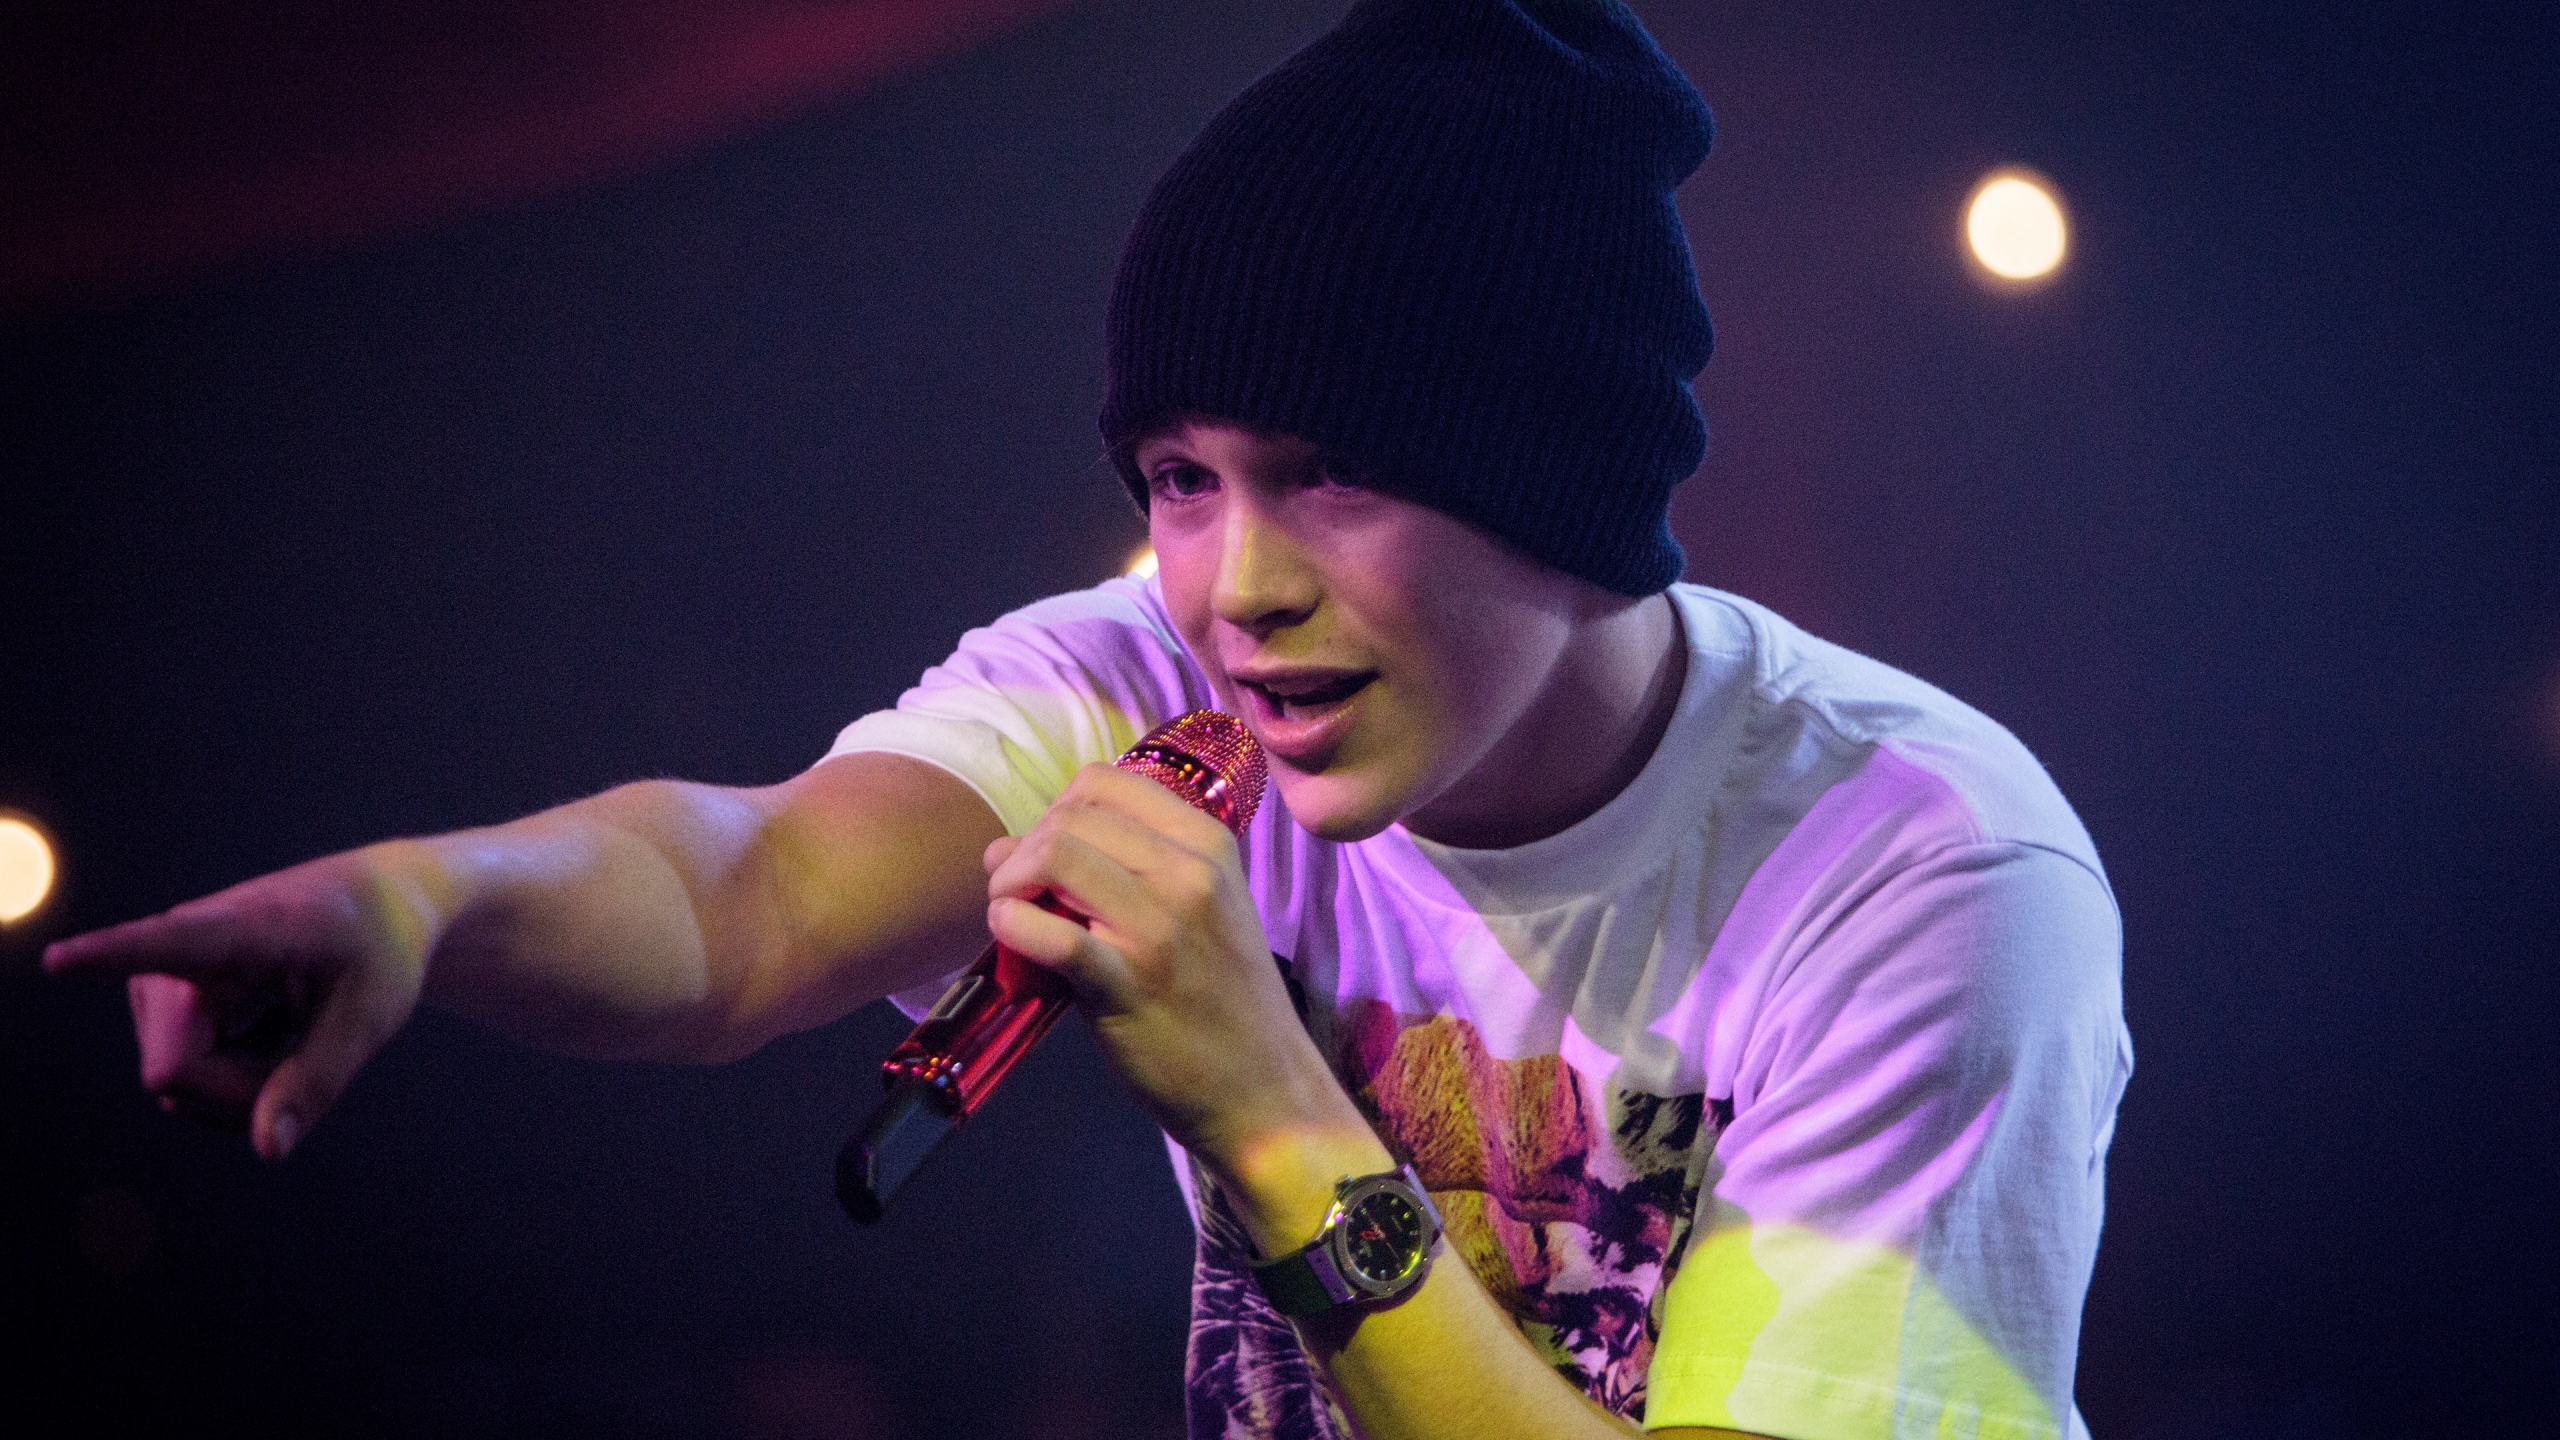 Austin Mahone on Stage for 2560x1440 HDTV resolution